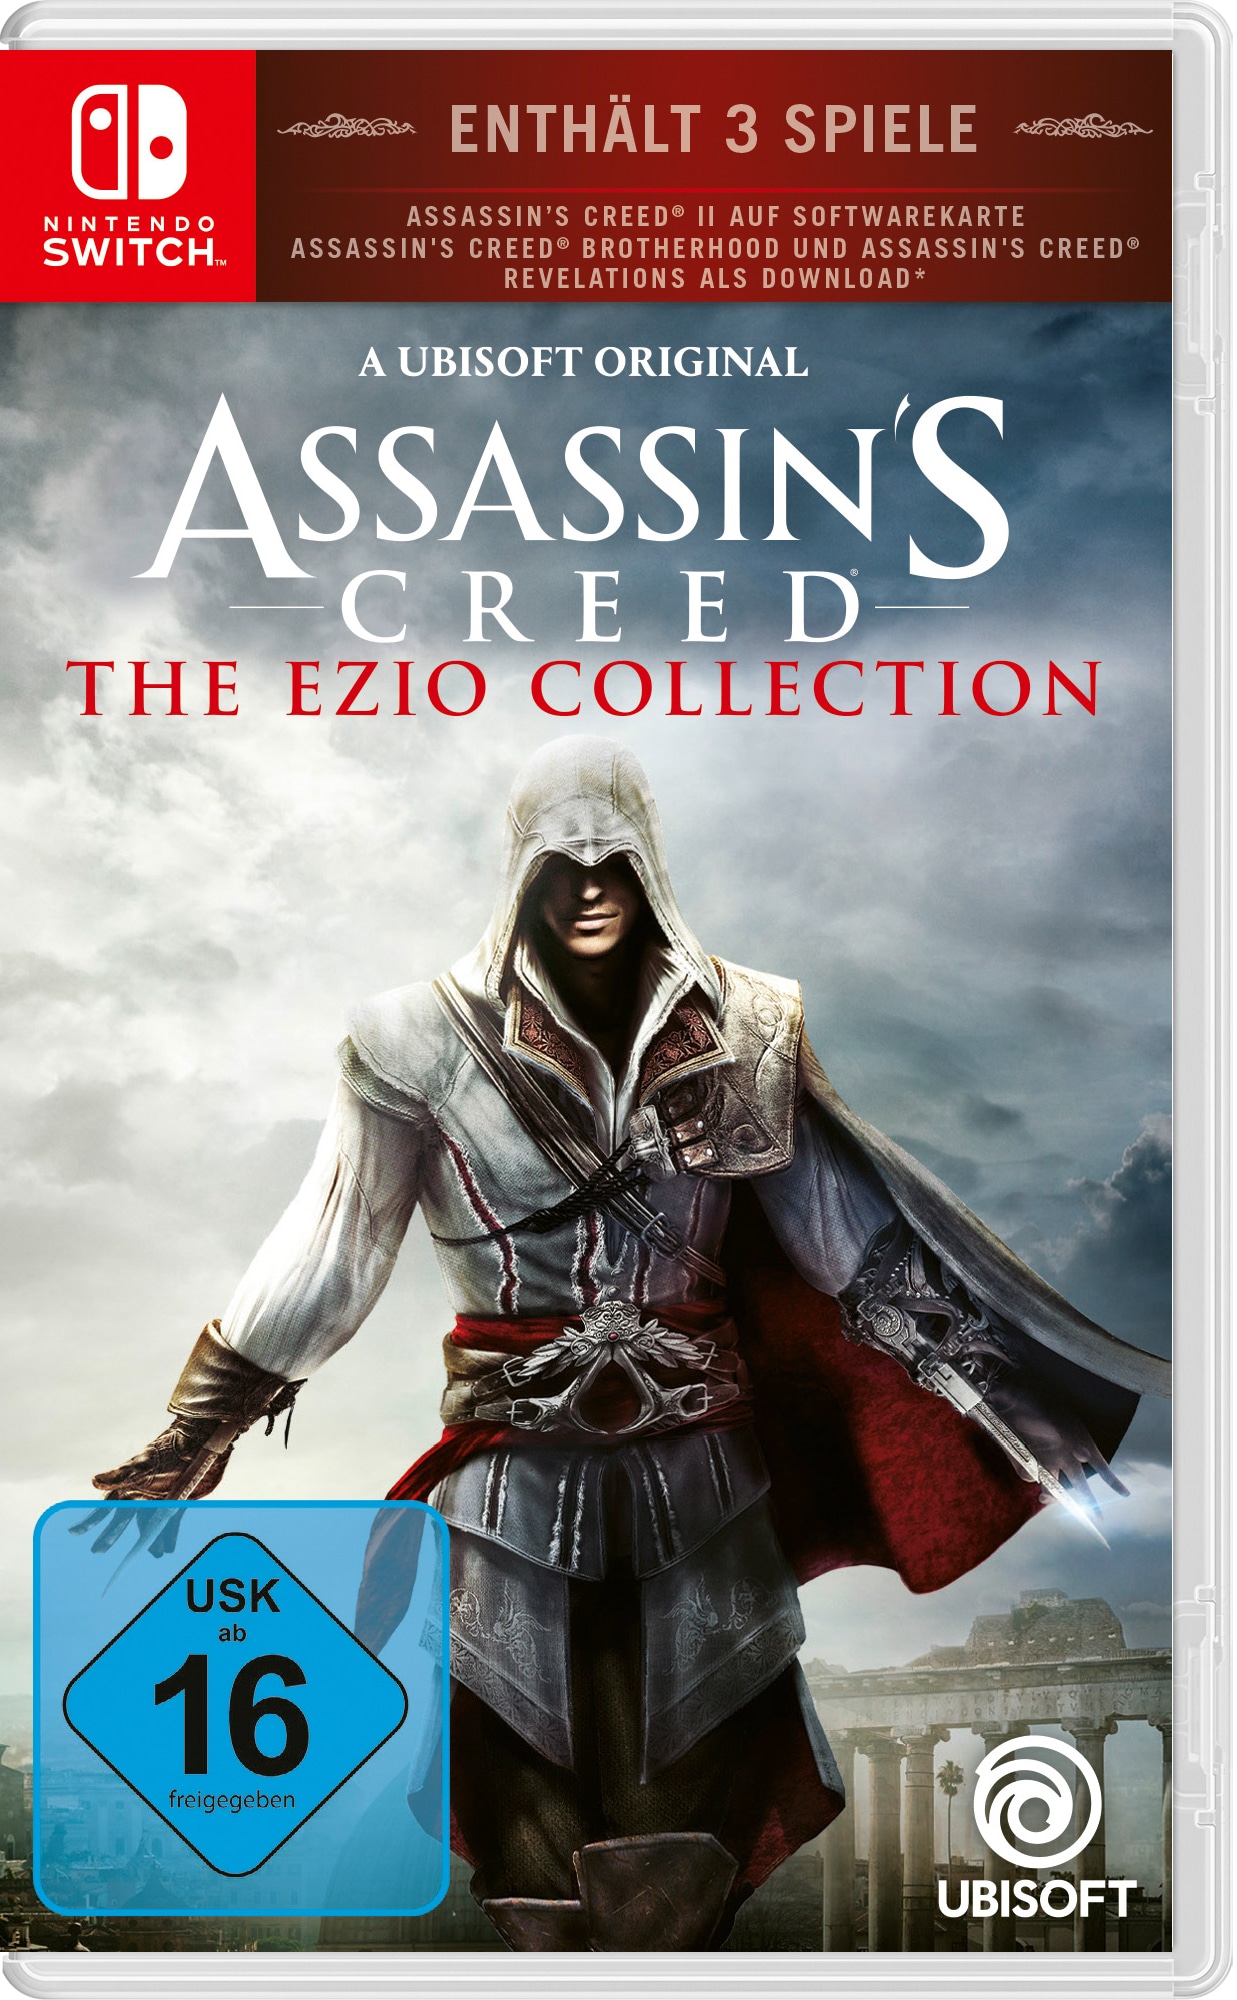 UBISOFT Spielesoftware »Assassin's Creed The Ezio Collection«, Nintendo Switch